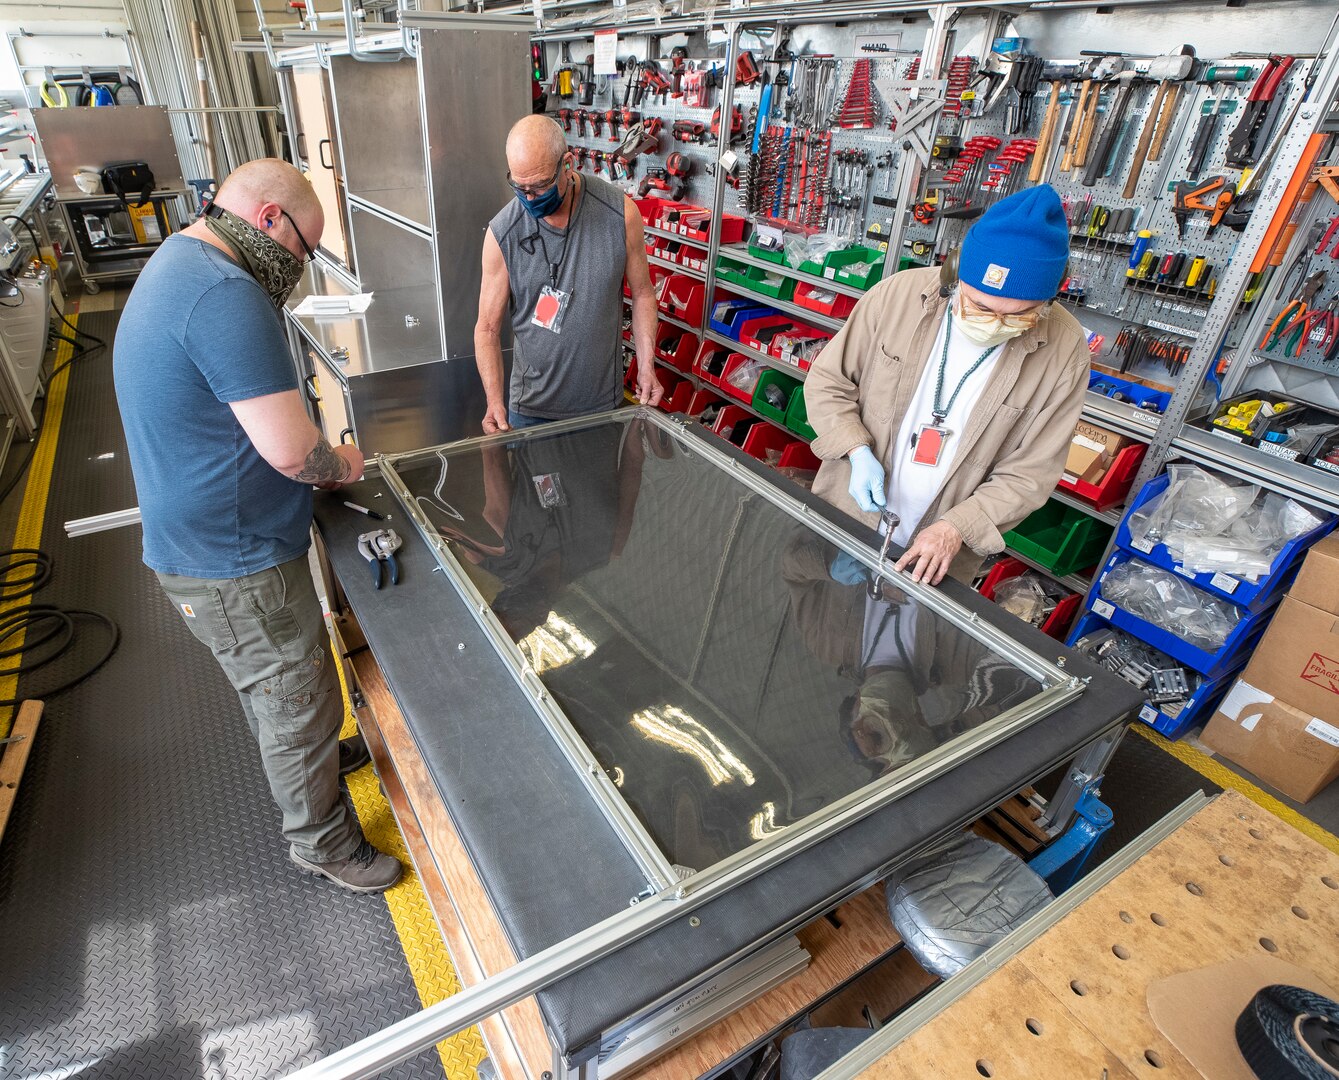 Jared David (left), Tracy Atkins (center) and Harlen Caldwell (right) assemble clean barrier made from vinyl in the Moonshine Lab at Puget Sound Naval Shipyard & Intermediate Maintenance Facility May 4. This team is part of a cadre of innovators taking on the challenge of designing and building protective barriers for customer facing interactions within the shipyard.